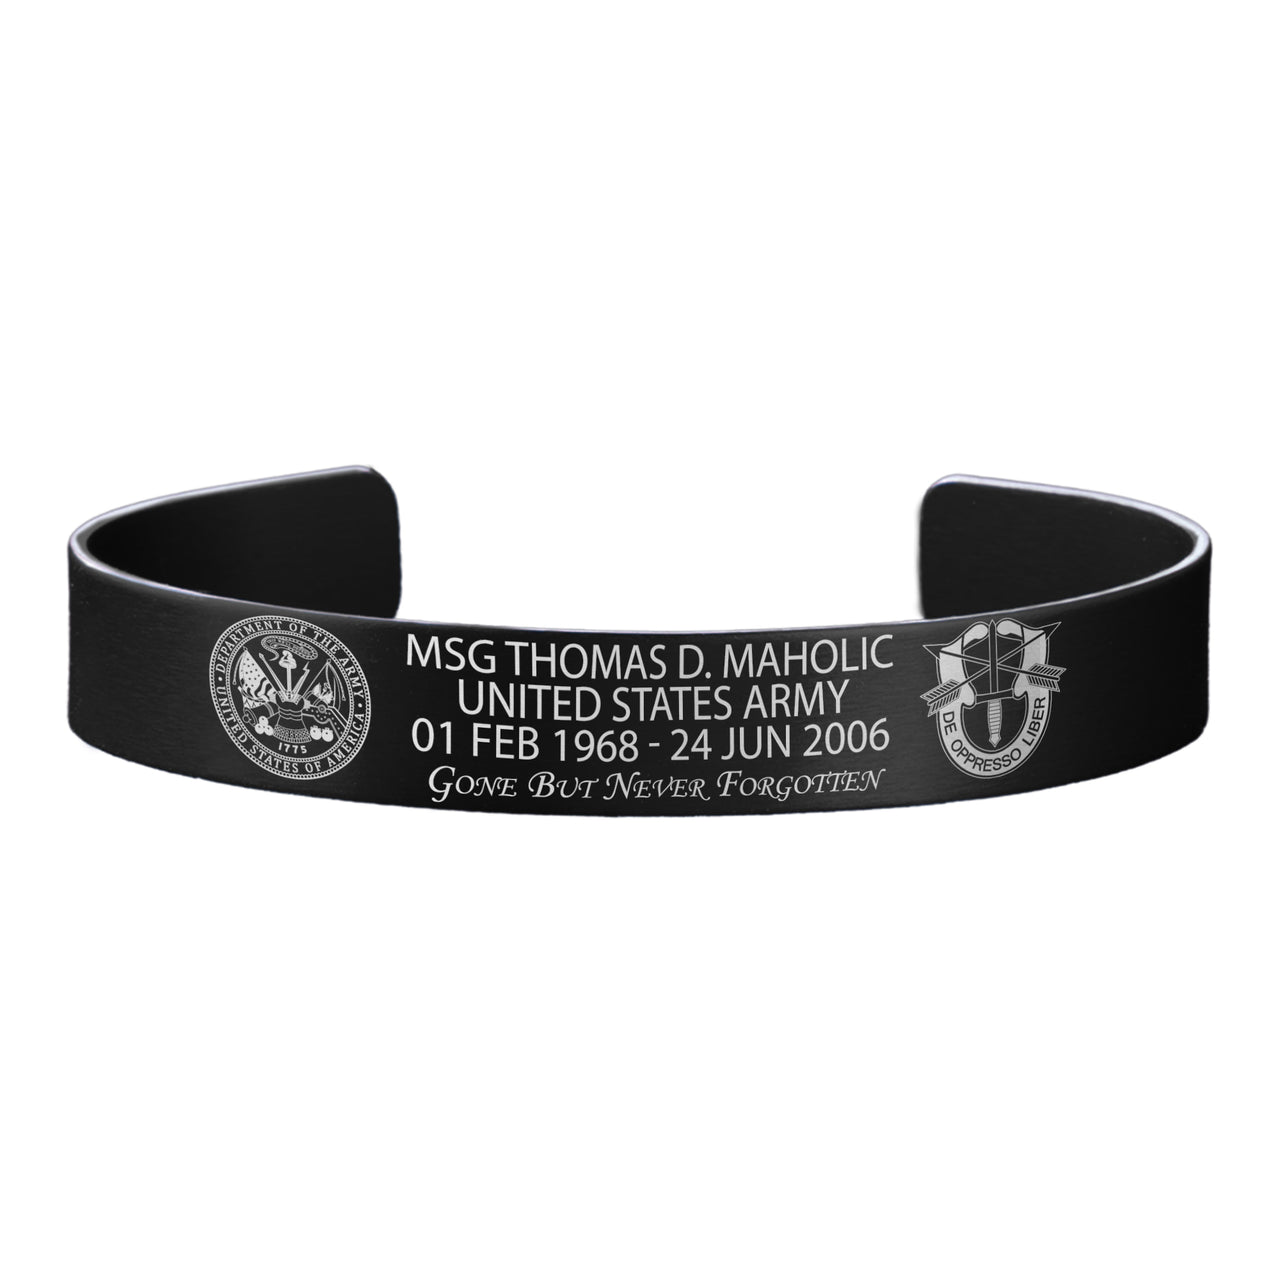 MSG Thomas D. Maholic Memorial Band – Hosted by the Maholic Family